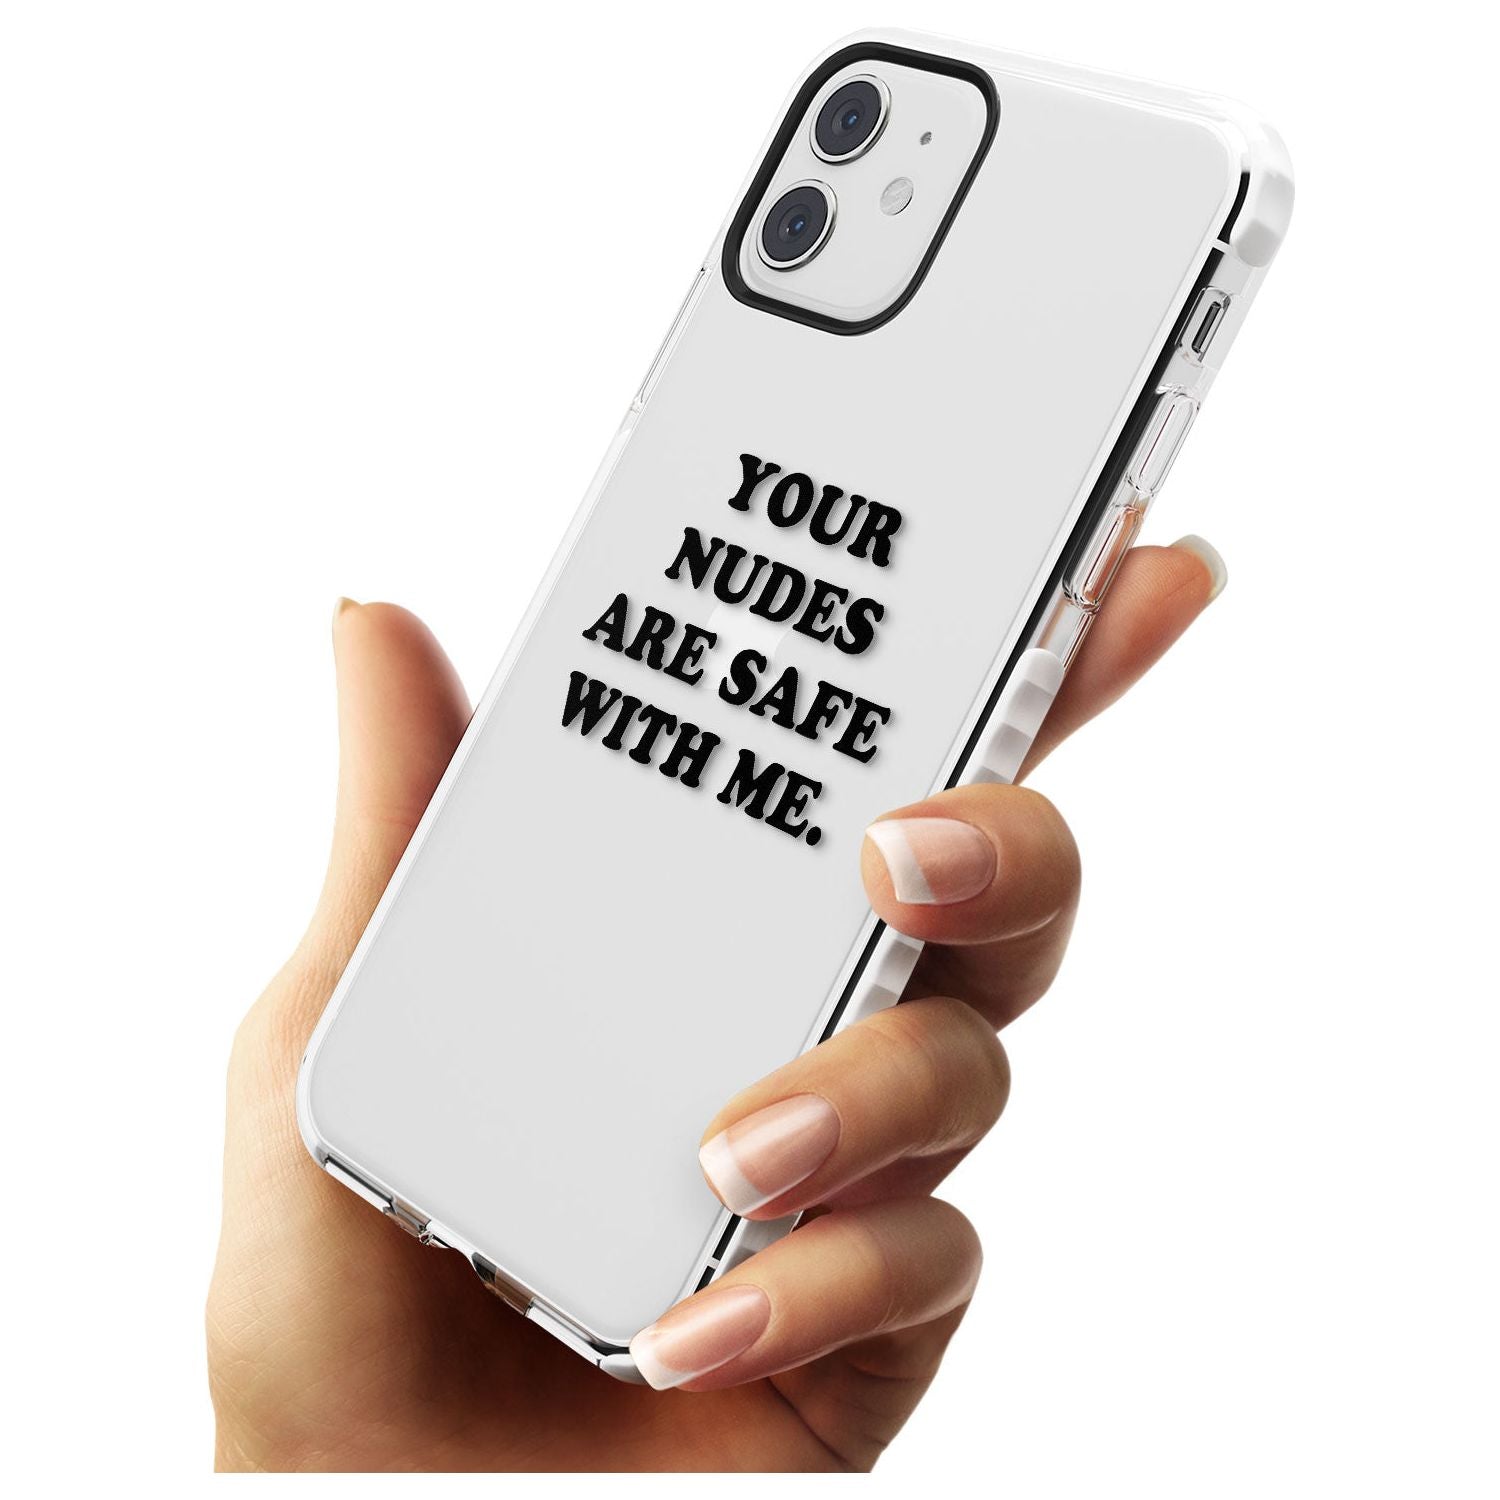 Your nudes are safe with me... BLACK Impact Phone Case for iPhone 11